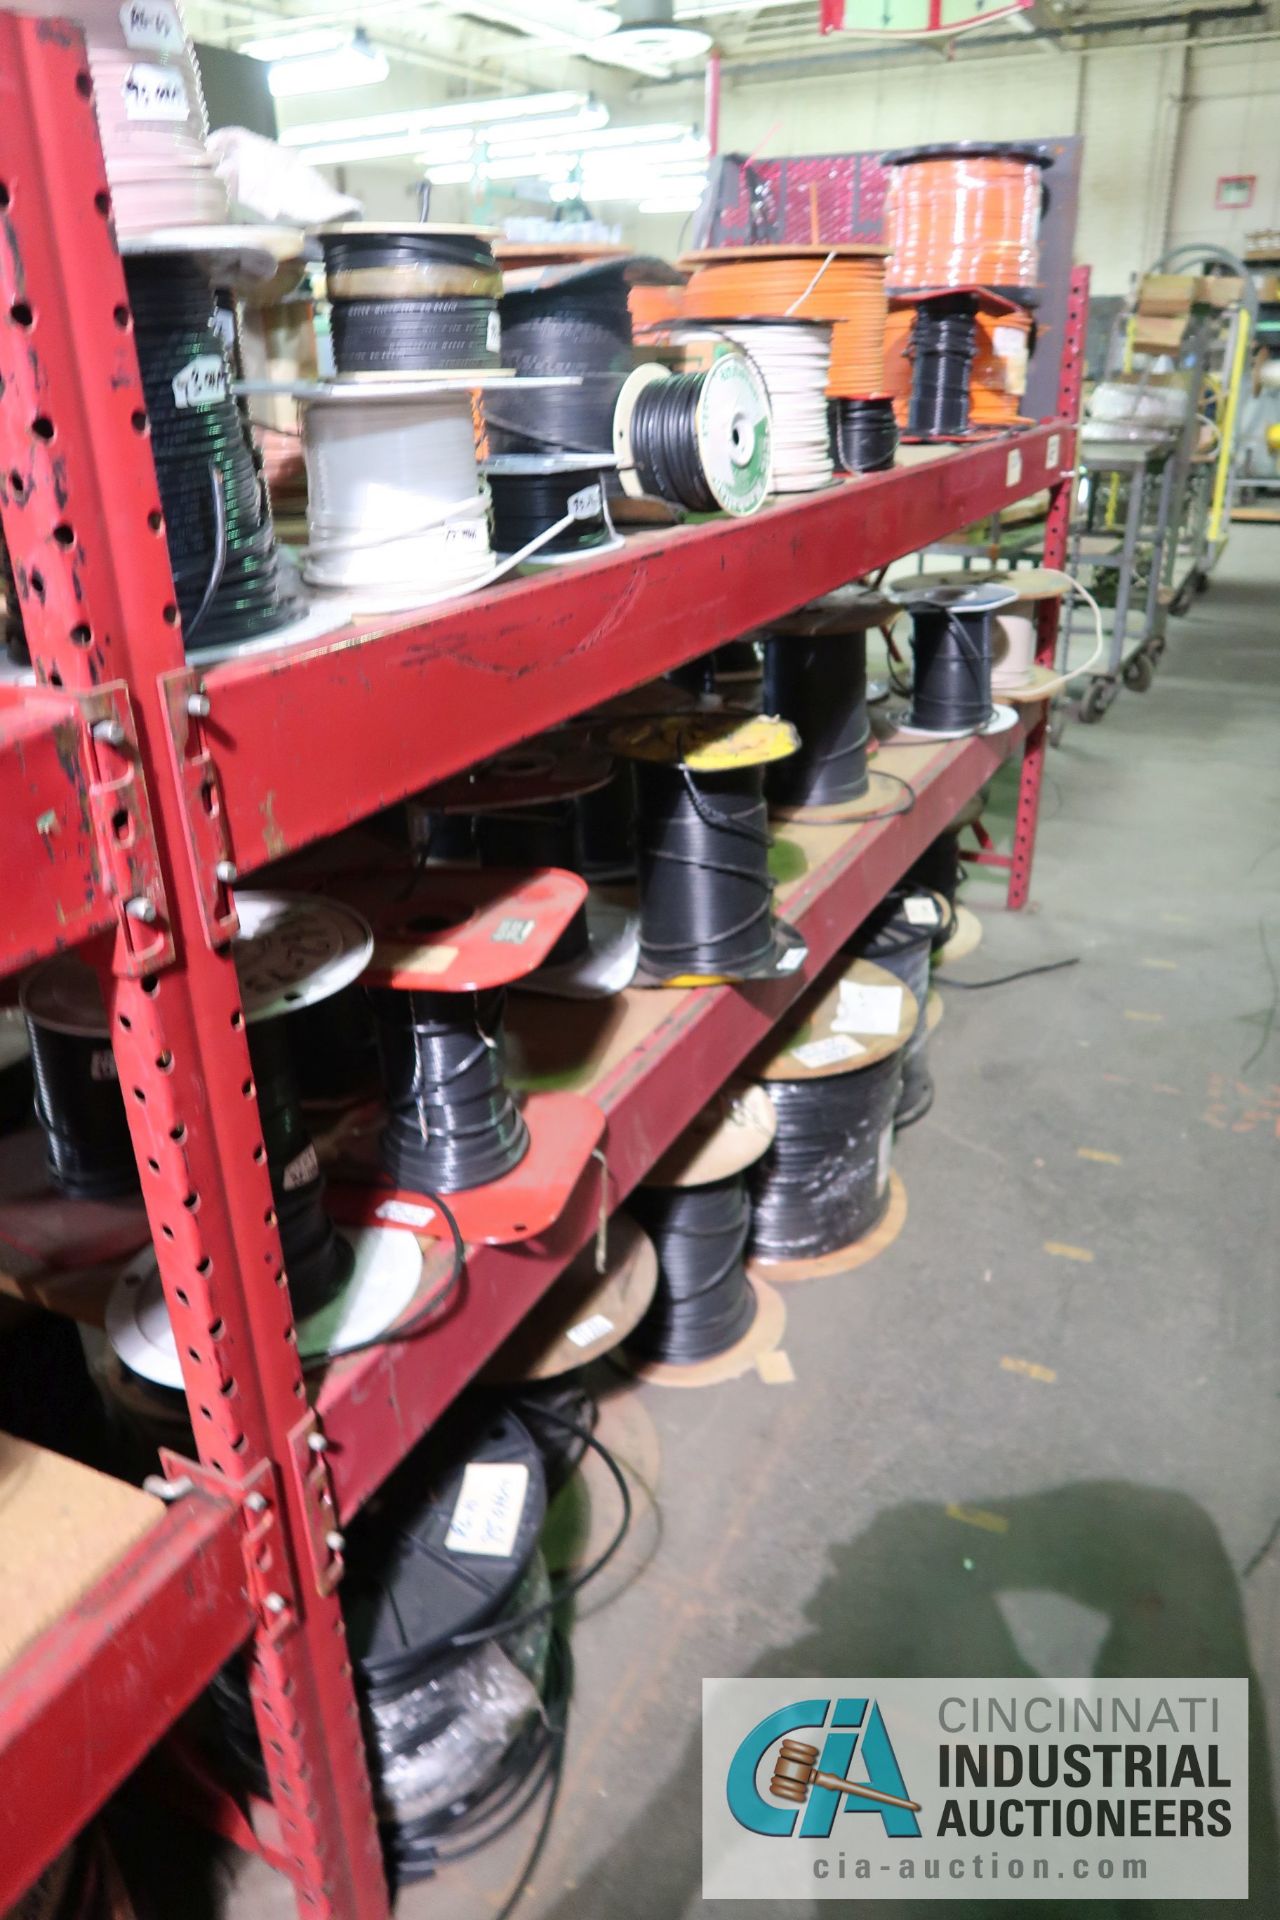 (LOT) LARGE QUANTITY OF COAX CABLE ON (3) SECTIONS RED RACK - APPROX. (130) SPOOLS - SOLD BY THE - Image 14 of 14